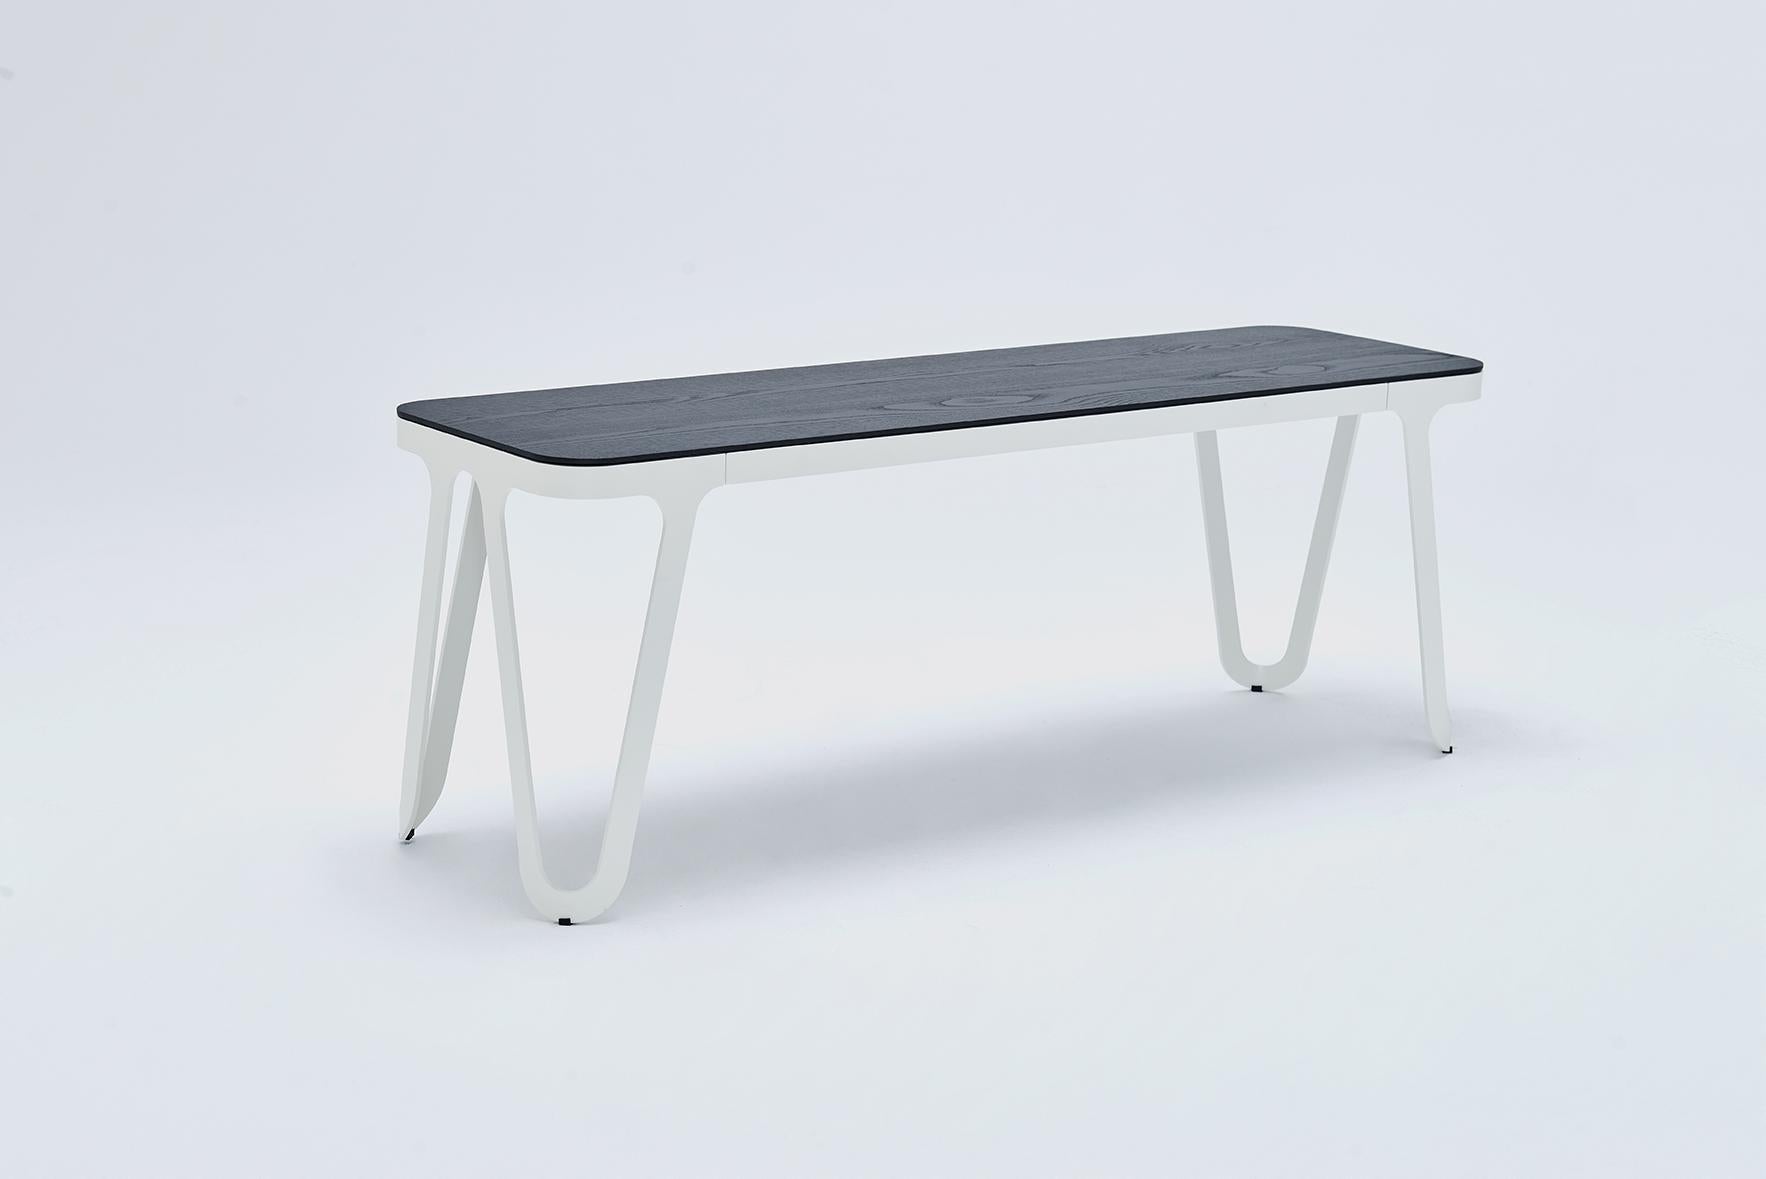 Loop bench 240 Ash by Sebastian Scherer
Material:aluminium, ash
Dimensions: D240x W38 x H45 cm.
Weight: 30.5 kg
Also available: colours: solid wood (matt lacquered): black and white stained ash / natural oak / american walnut
frame (matt): snow